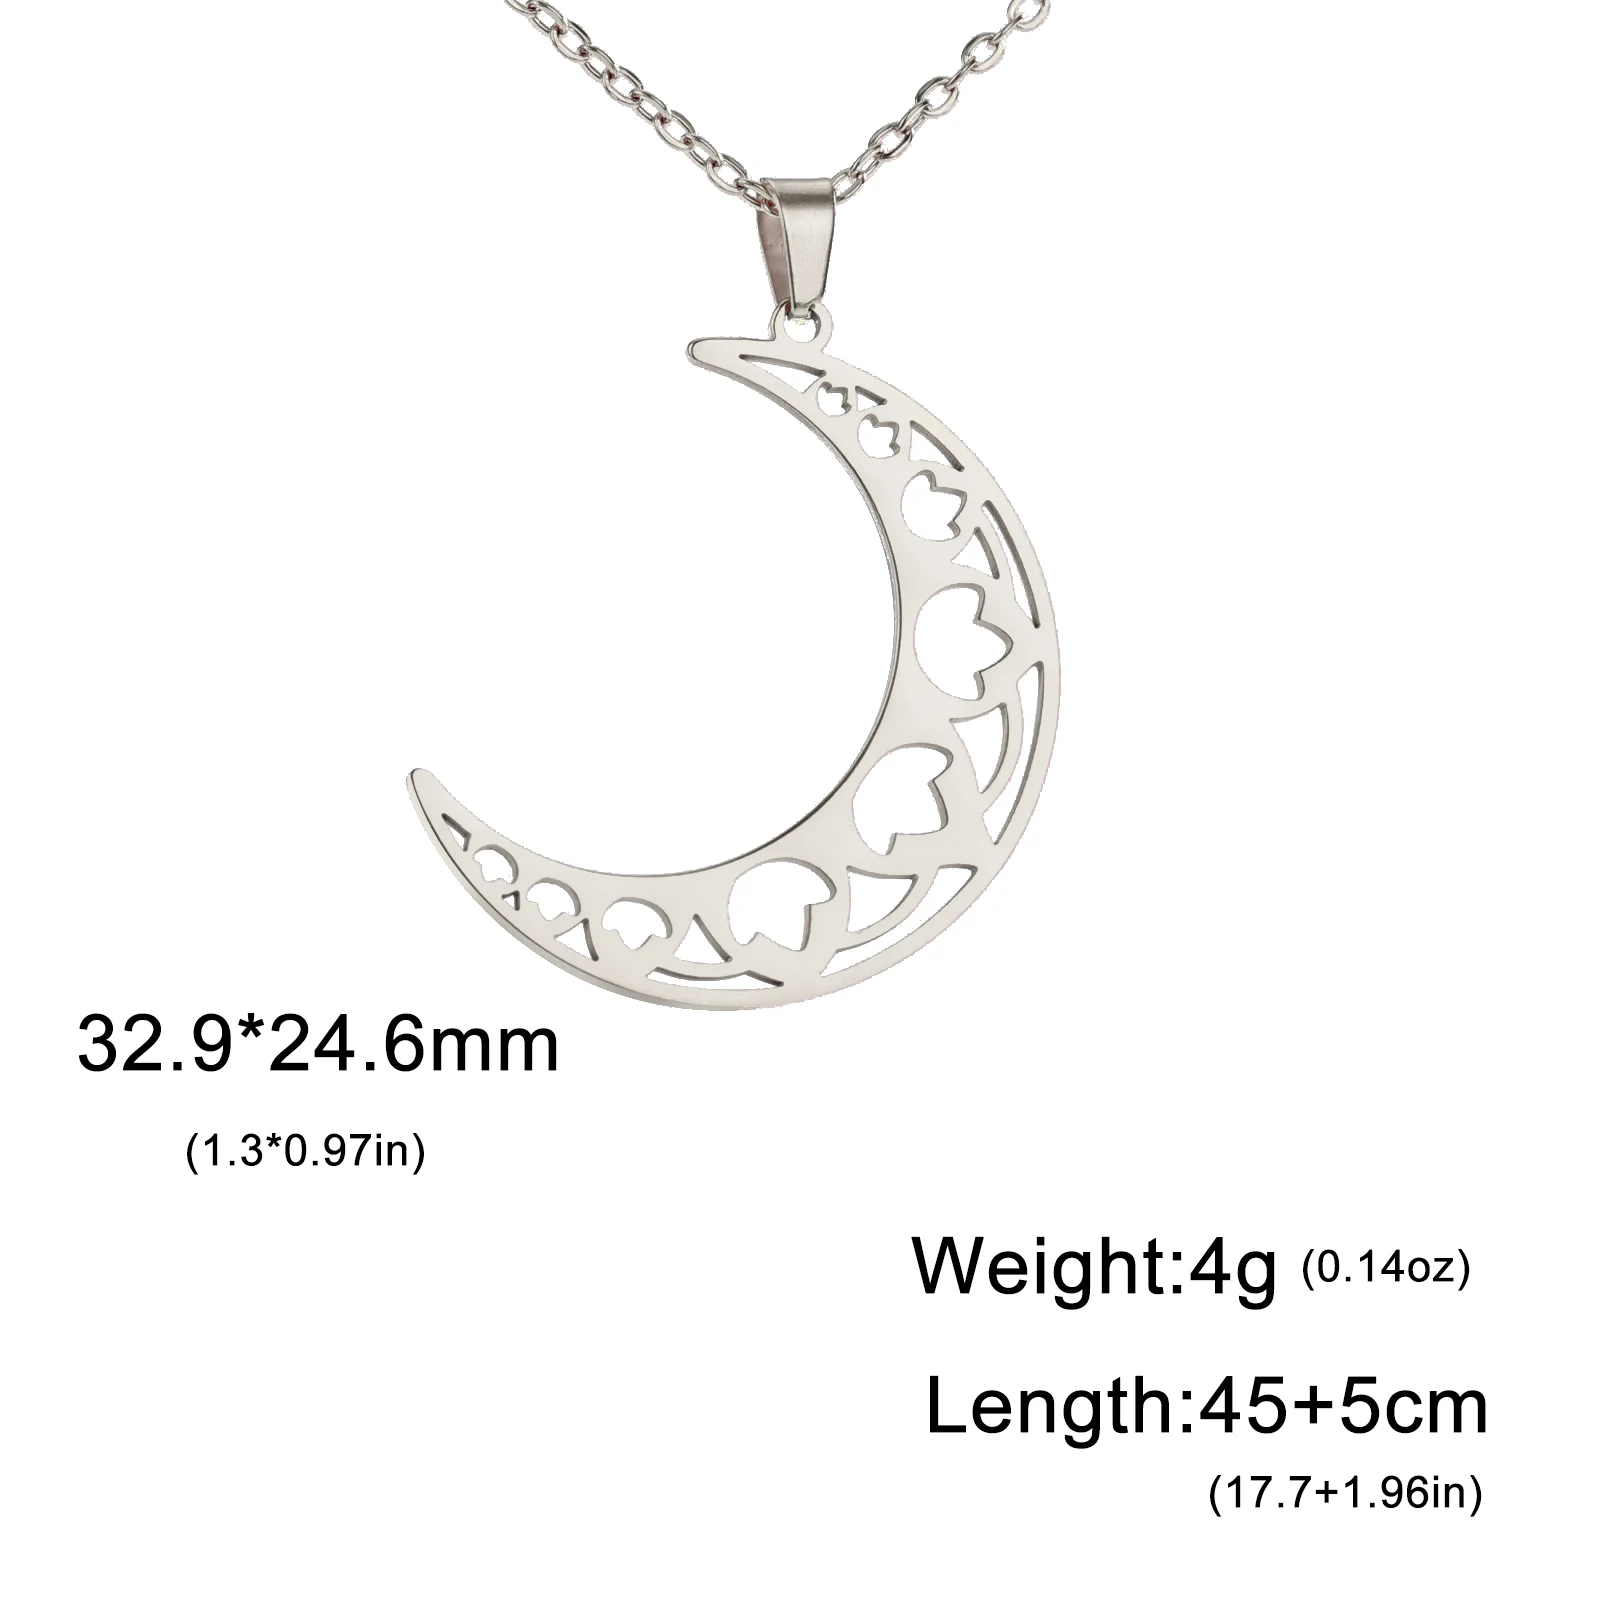 Unift Filigree Flower Crescent Moon Necklaces Stainless Steel Women Necklace Choker Vintage Ethnic Moon Jewelry Birthday